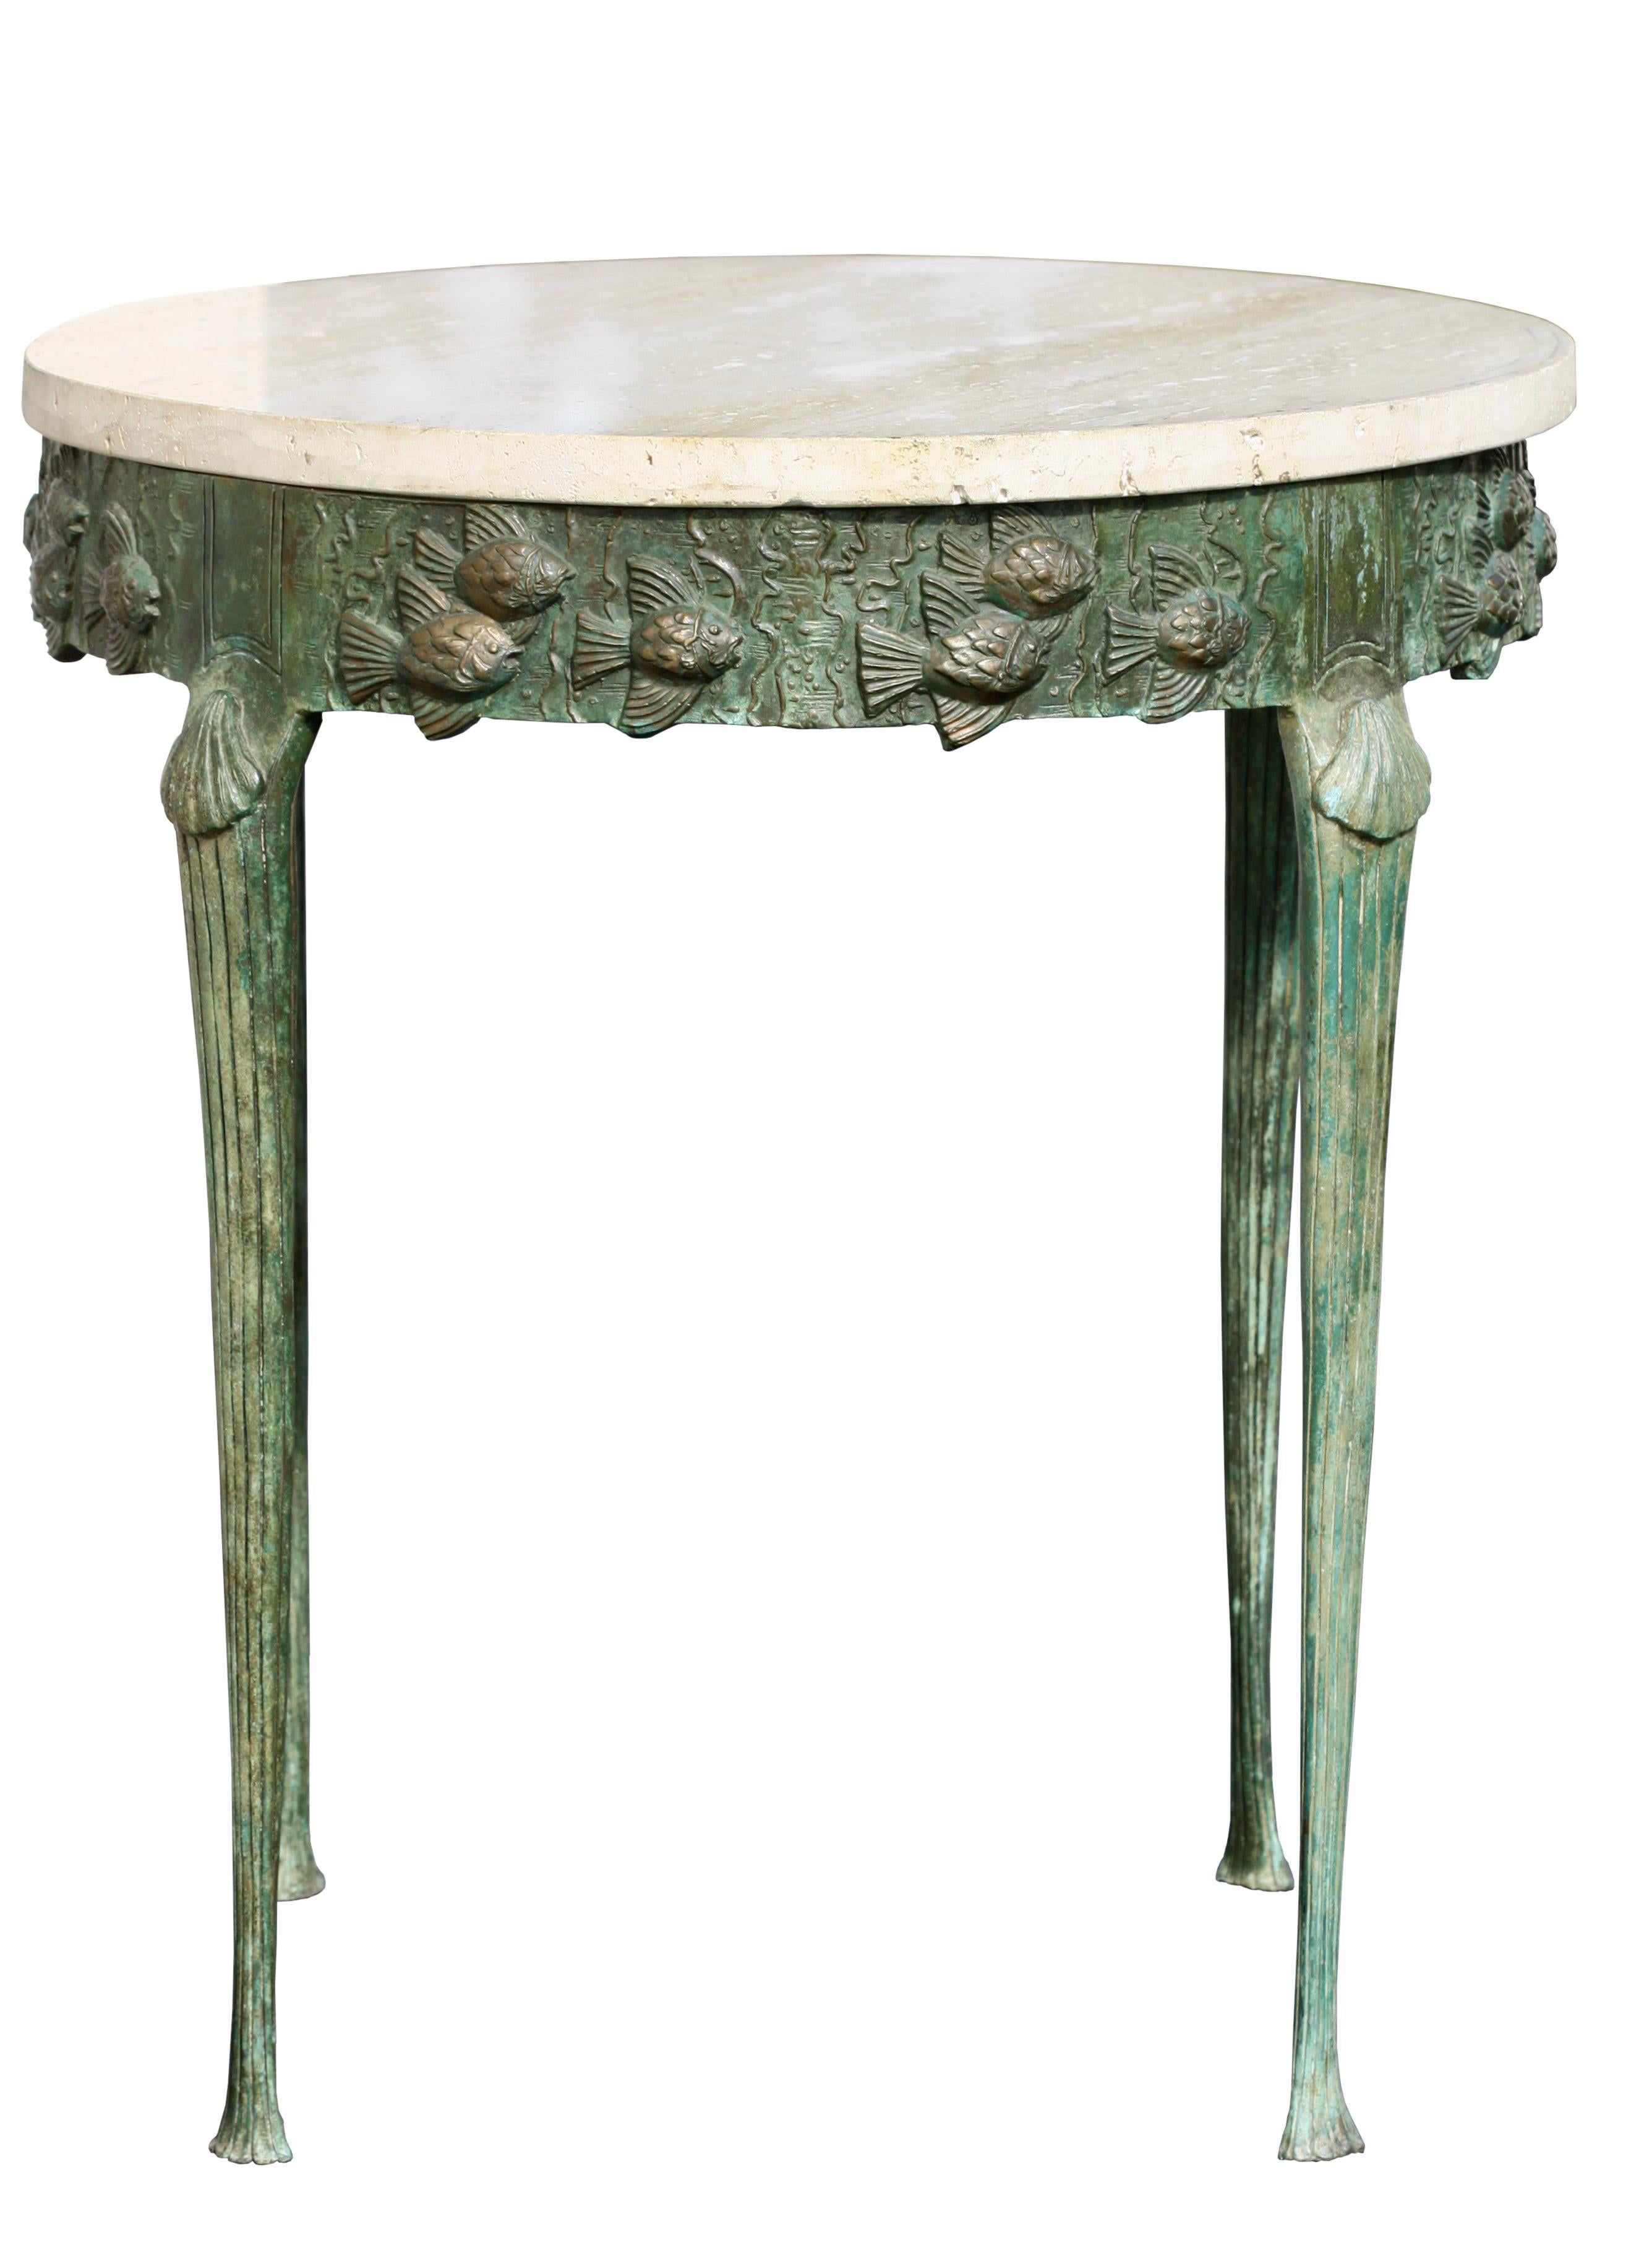 20th Century Art Deco Centre Table, Wrought Iron and Marble